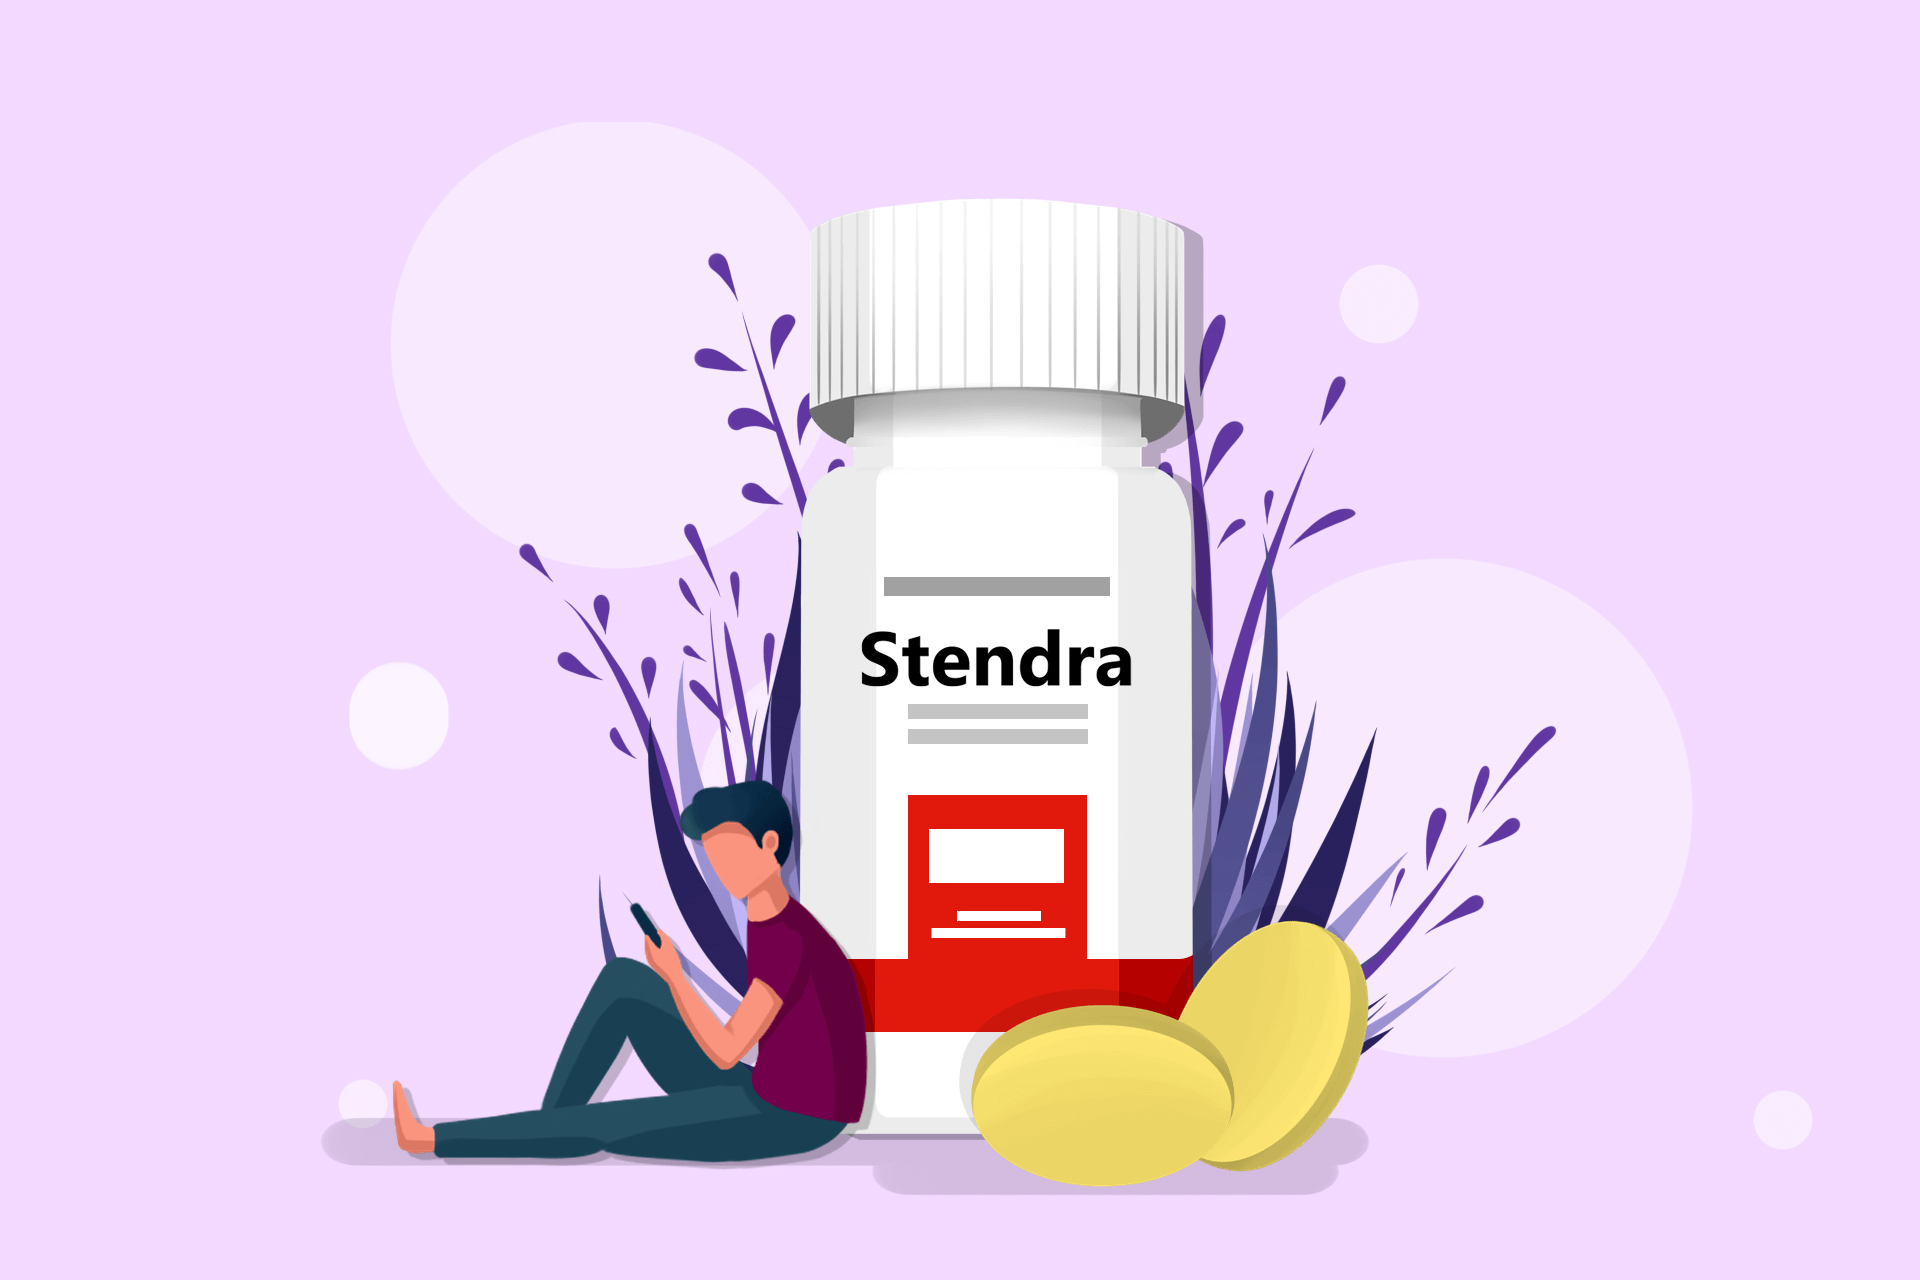 which is better viagra or stendra